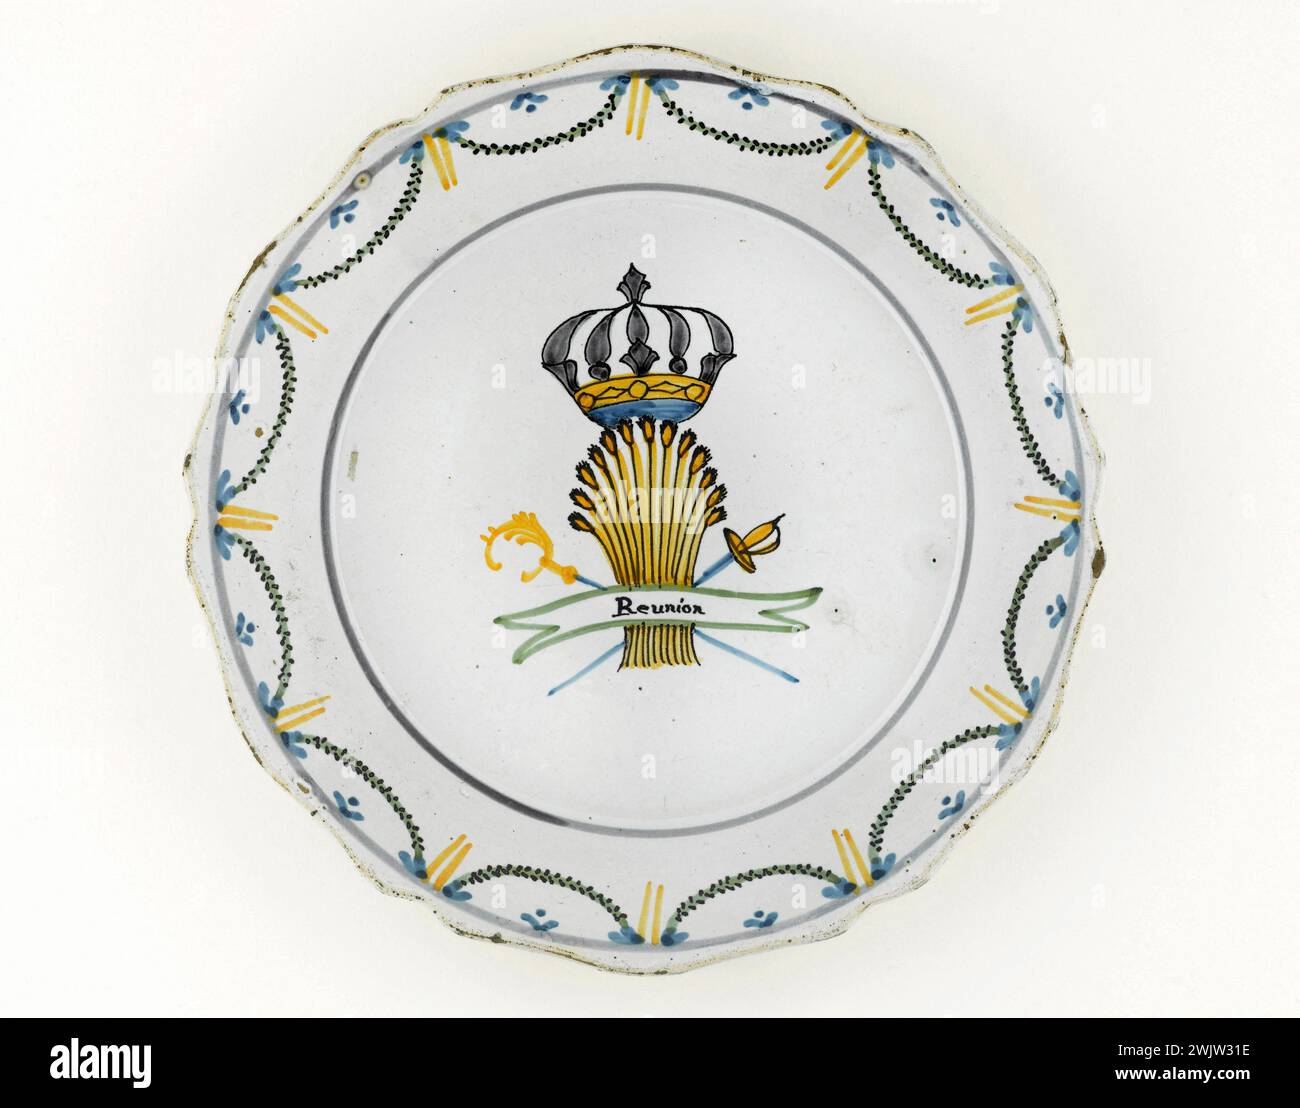 Anonymous. Plate. Earthenware. Around 1789. Paris, Carnavalet museum. 70955-42 Weapon, Crown, Epee, Epi Ble, Faience, Decorative Pattern, Revolutionary Periode, Reunion, Crockery, Plate Stock Photo